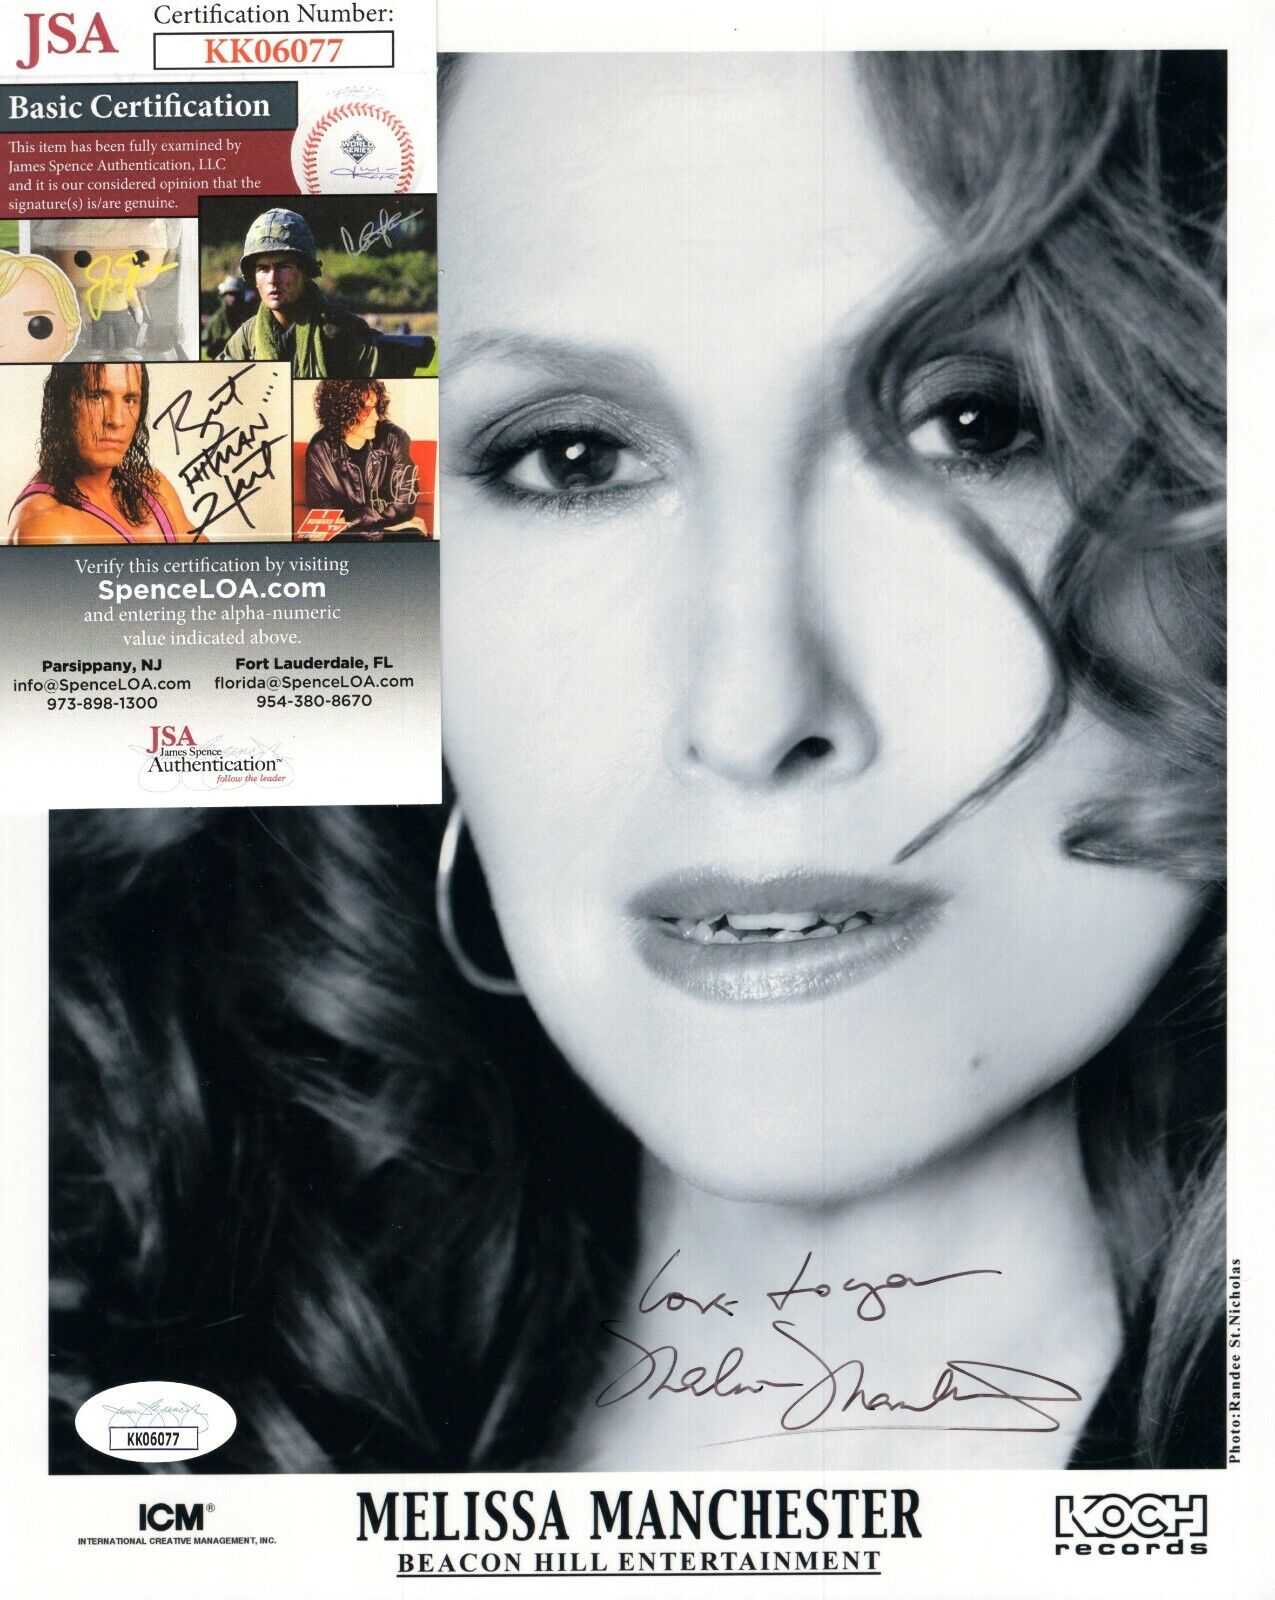 Melissa Manchester Actress Singer Hand Signed Autograph 8x10 Photo Poster painting with JSA COA